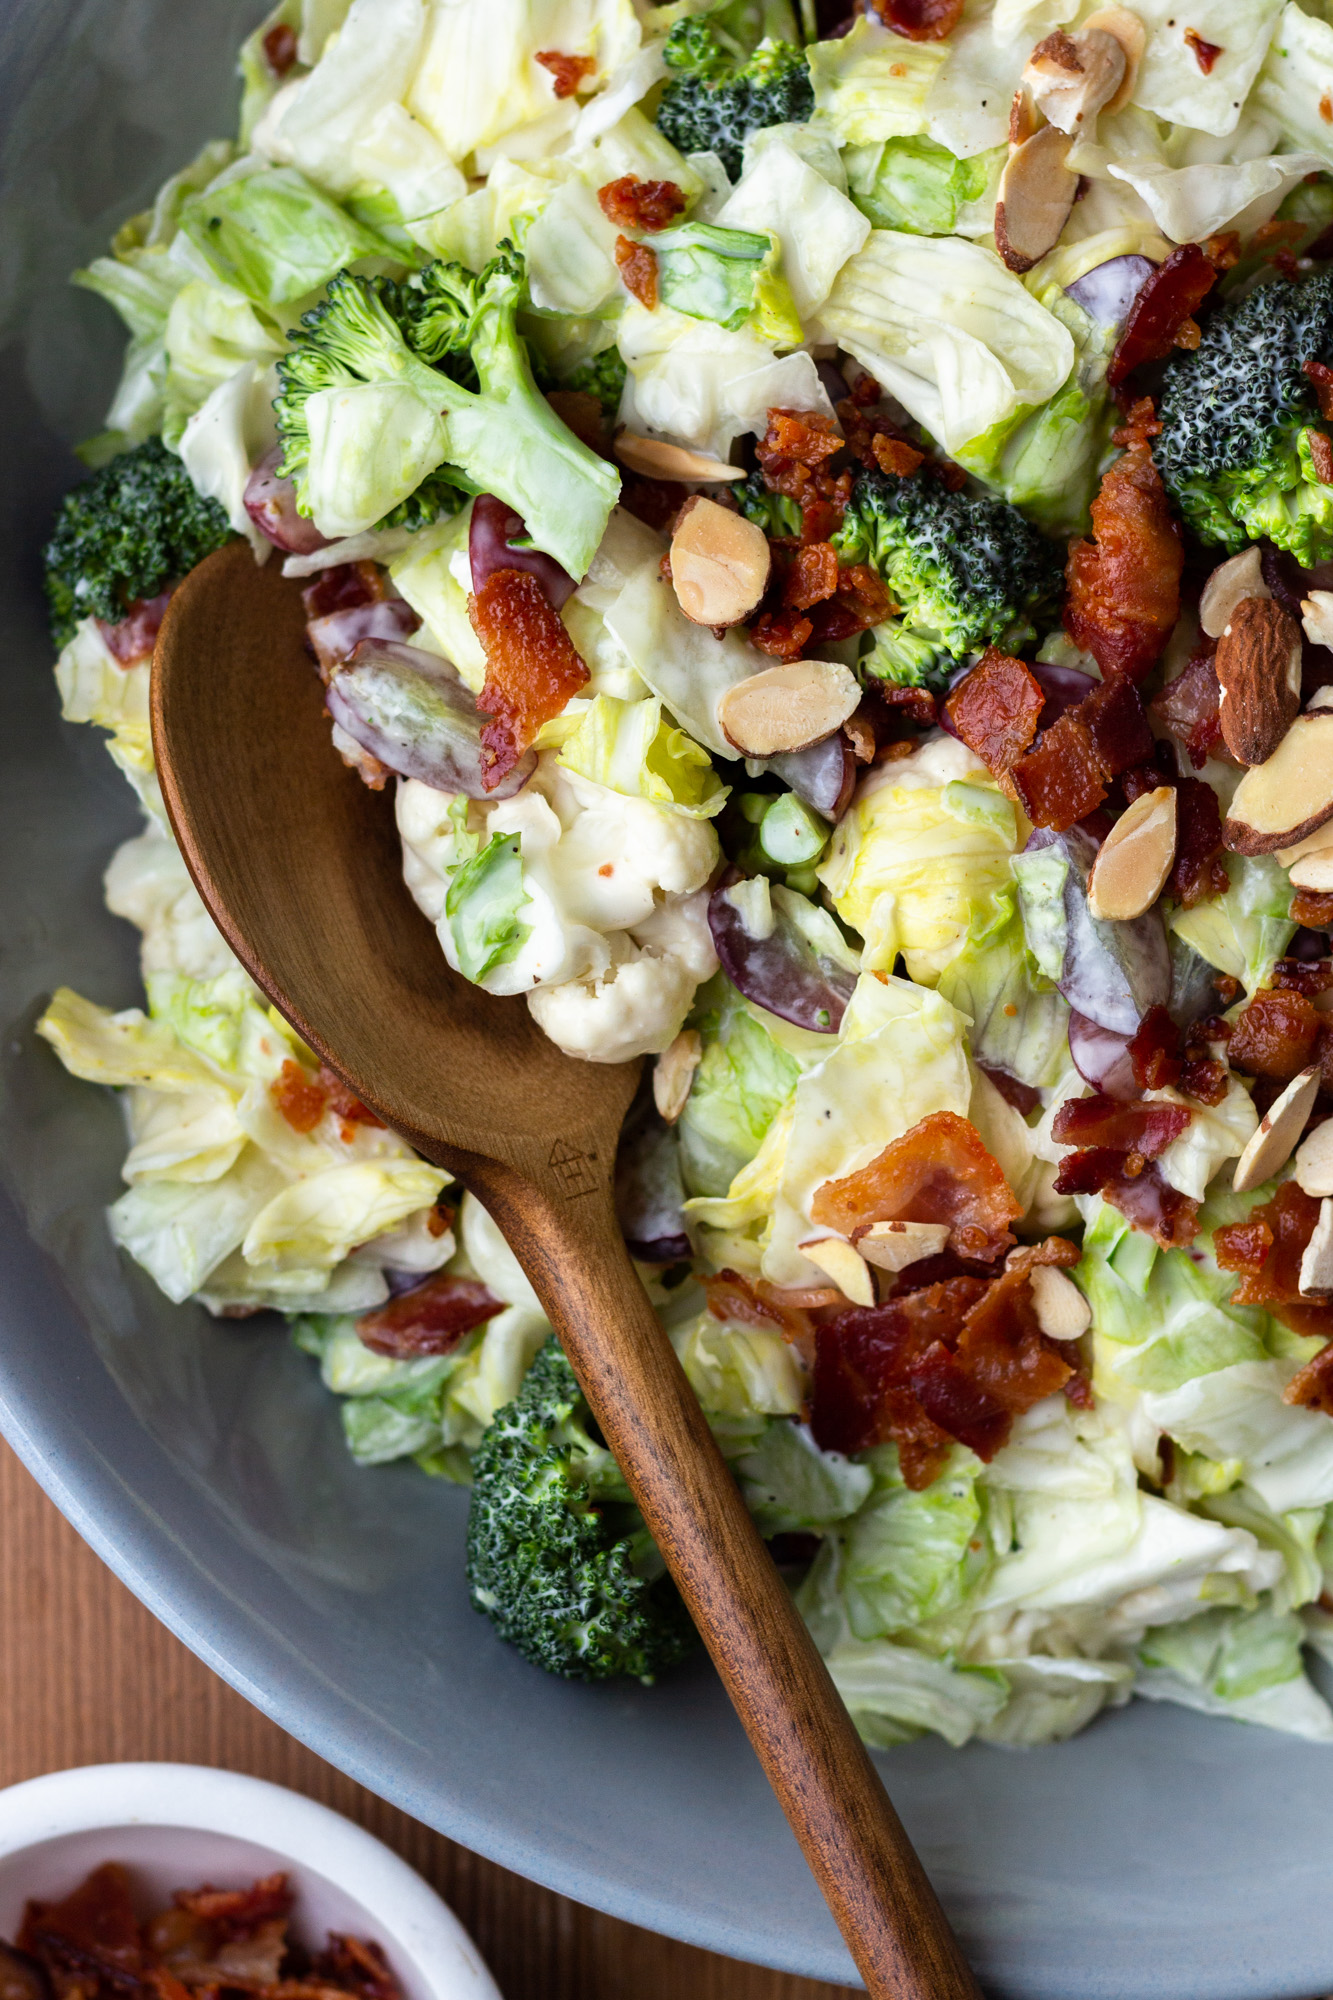 Easy and delicious side salad packed with veggies, bacon, grapes and almonds, then drizzled with a homemade, sweet, creamy dressing. Both adults and kids devour this salad! It’s perfect for a BBQ or quick weeknight side dish. 